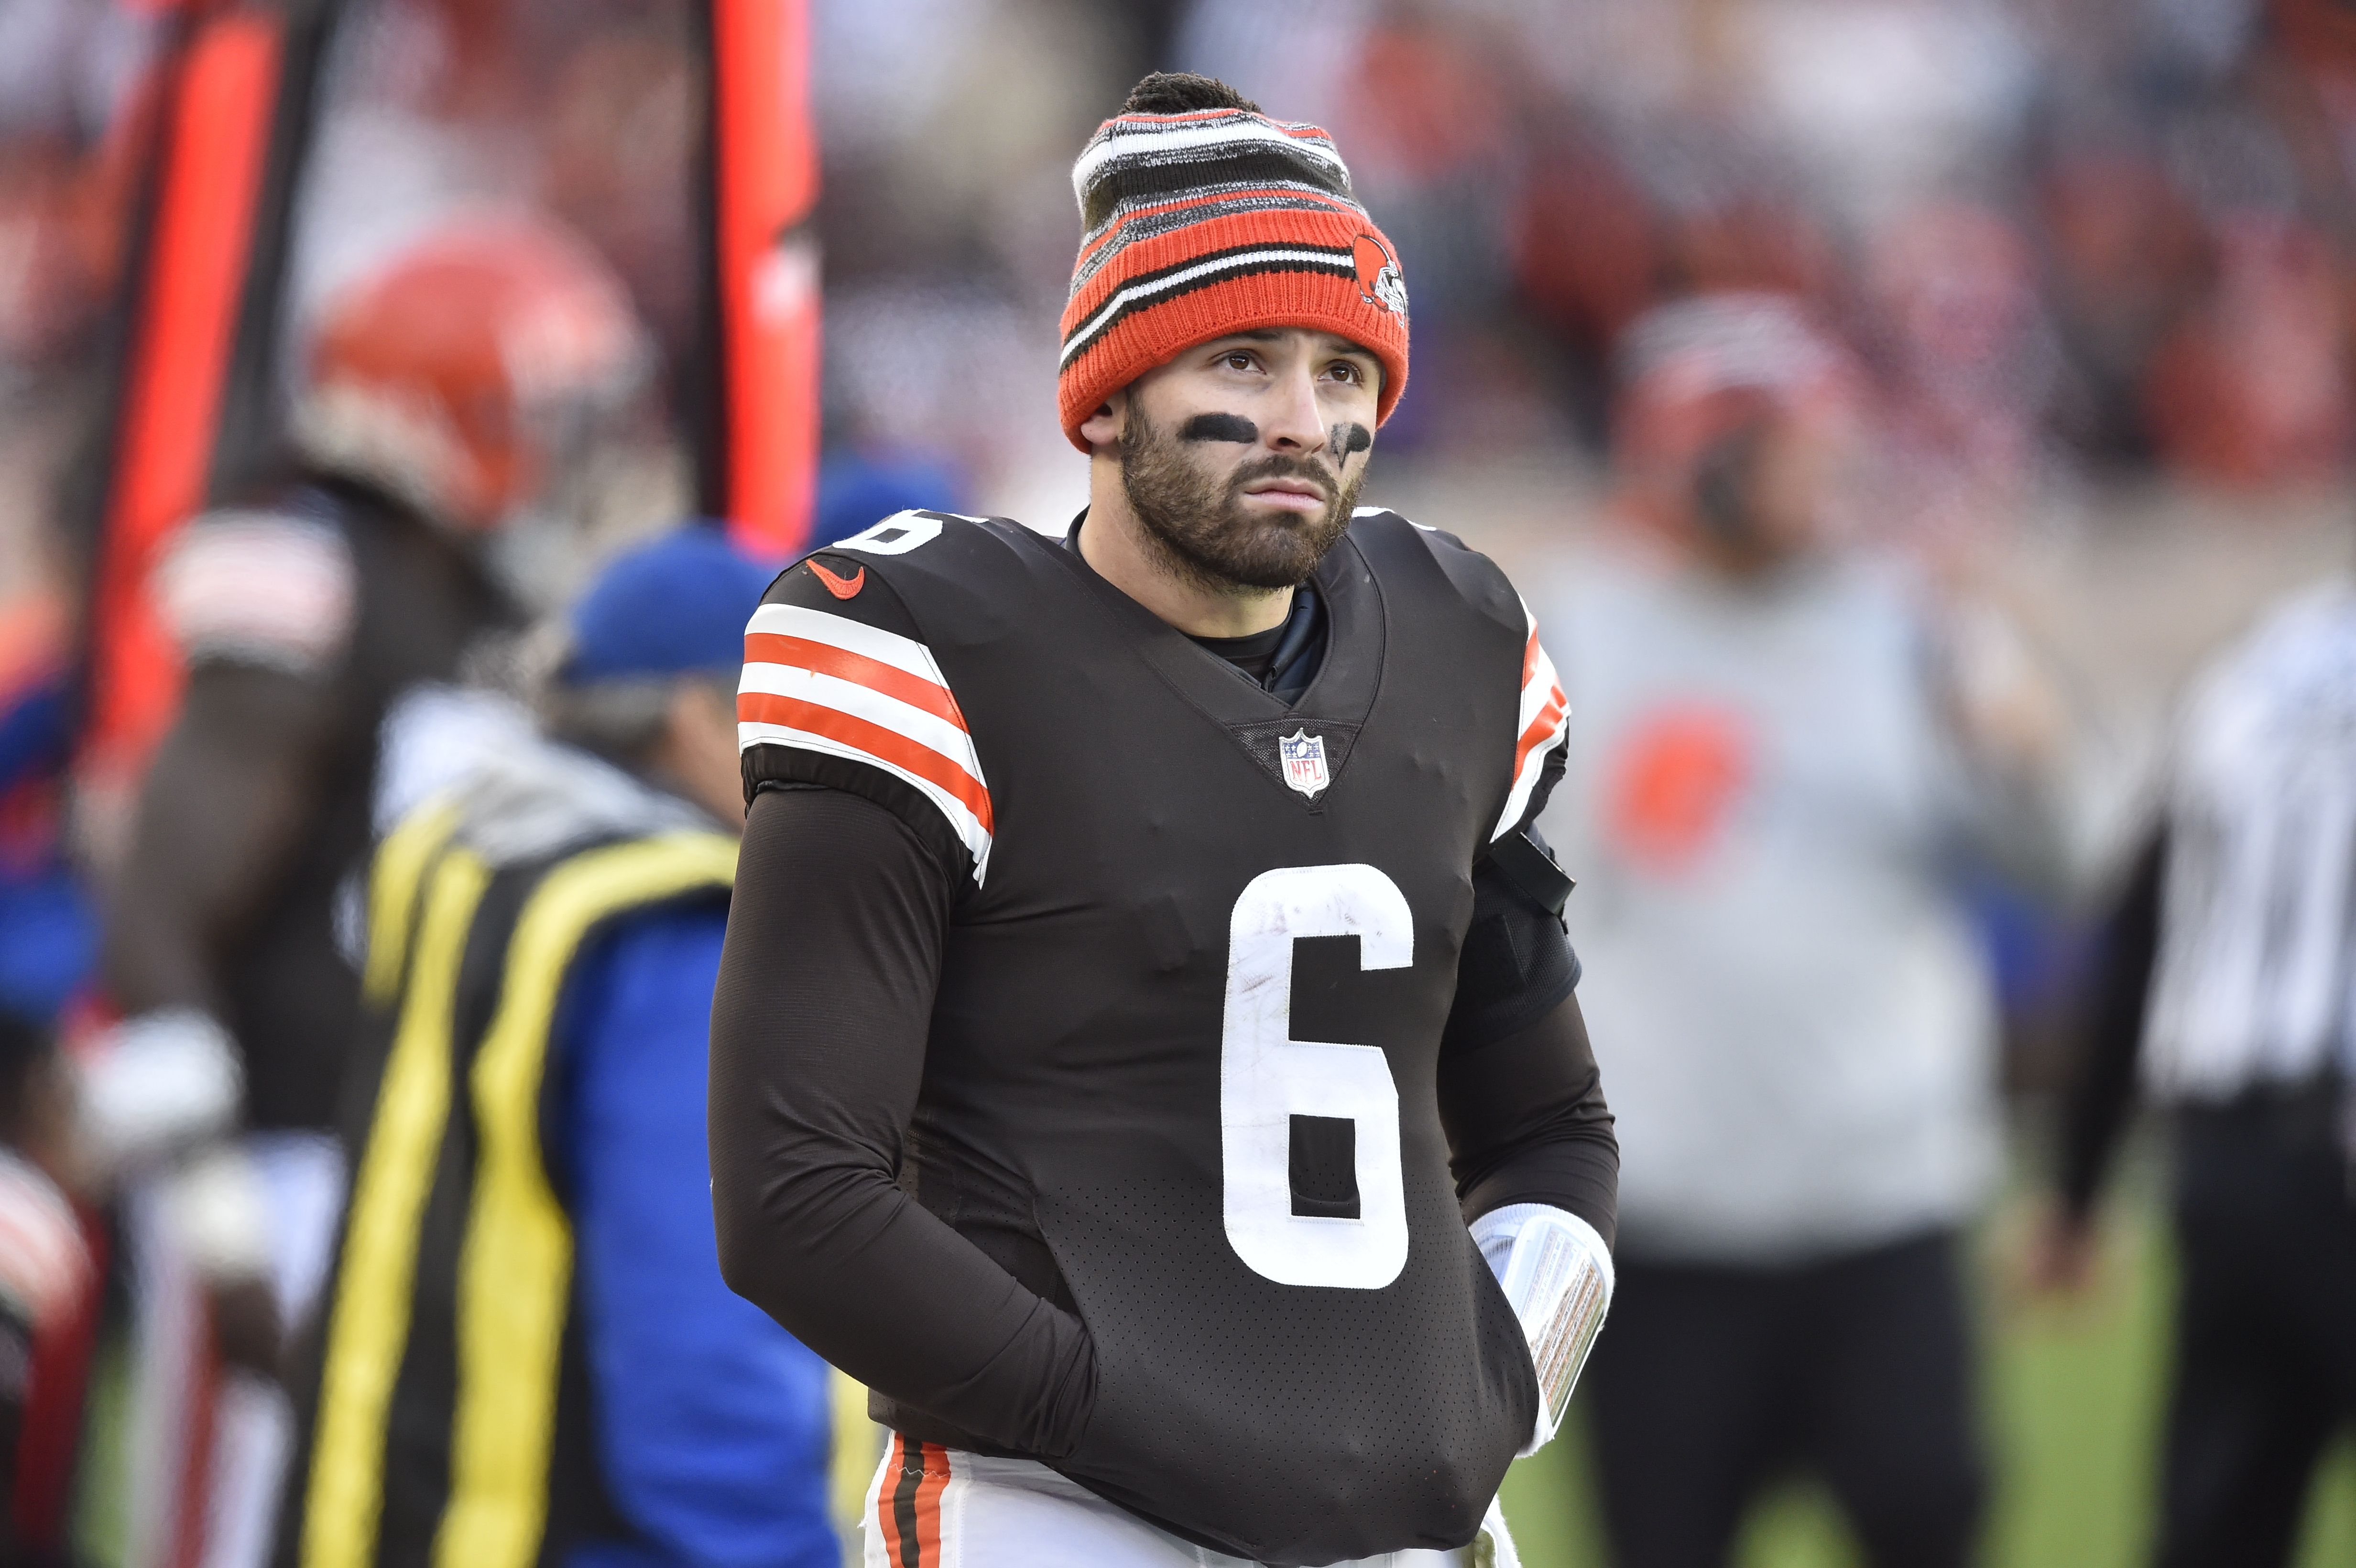 Browns' Baker Mayfield Slams NFL over COVID-19 Protocols: 'Make Up Your Damn Min..